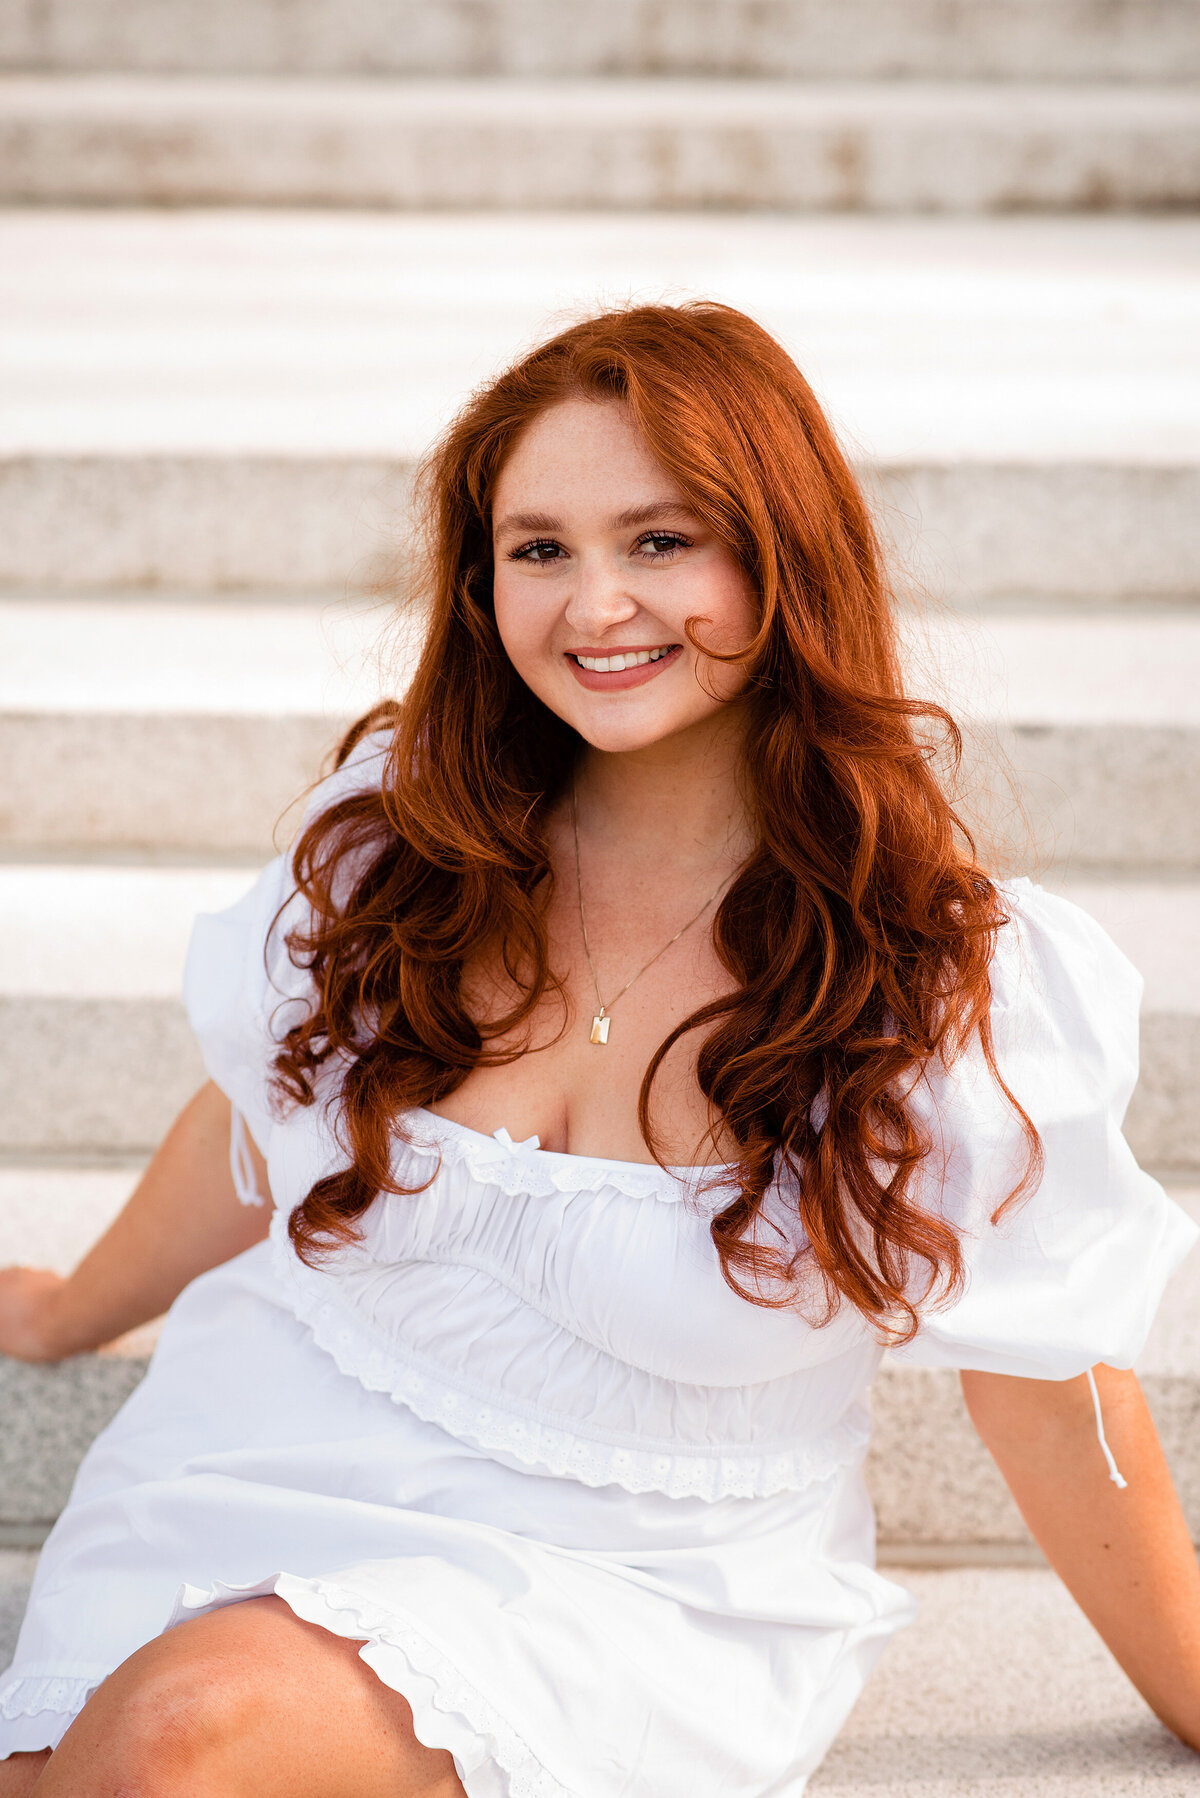 Headshot of girl smiling at the camera wearing a white dress